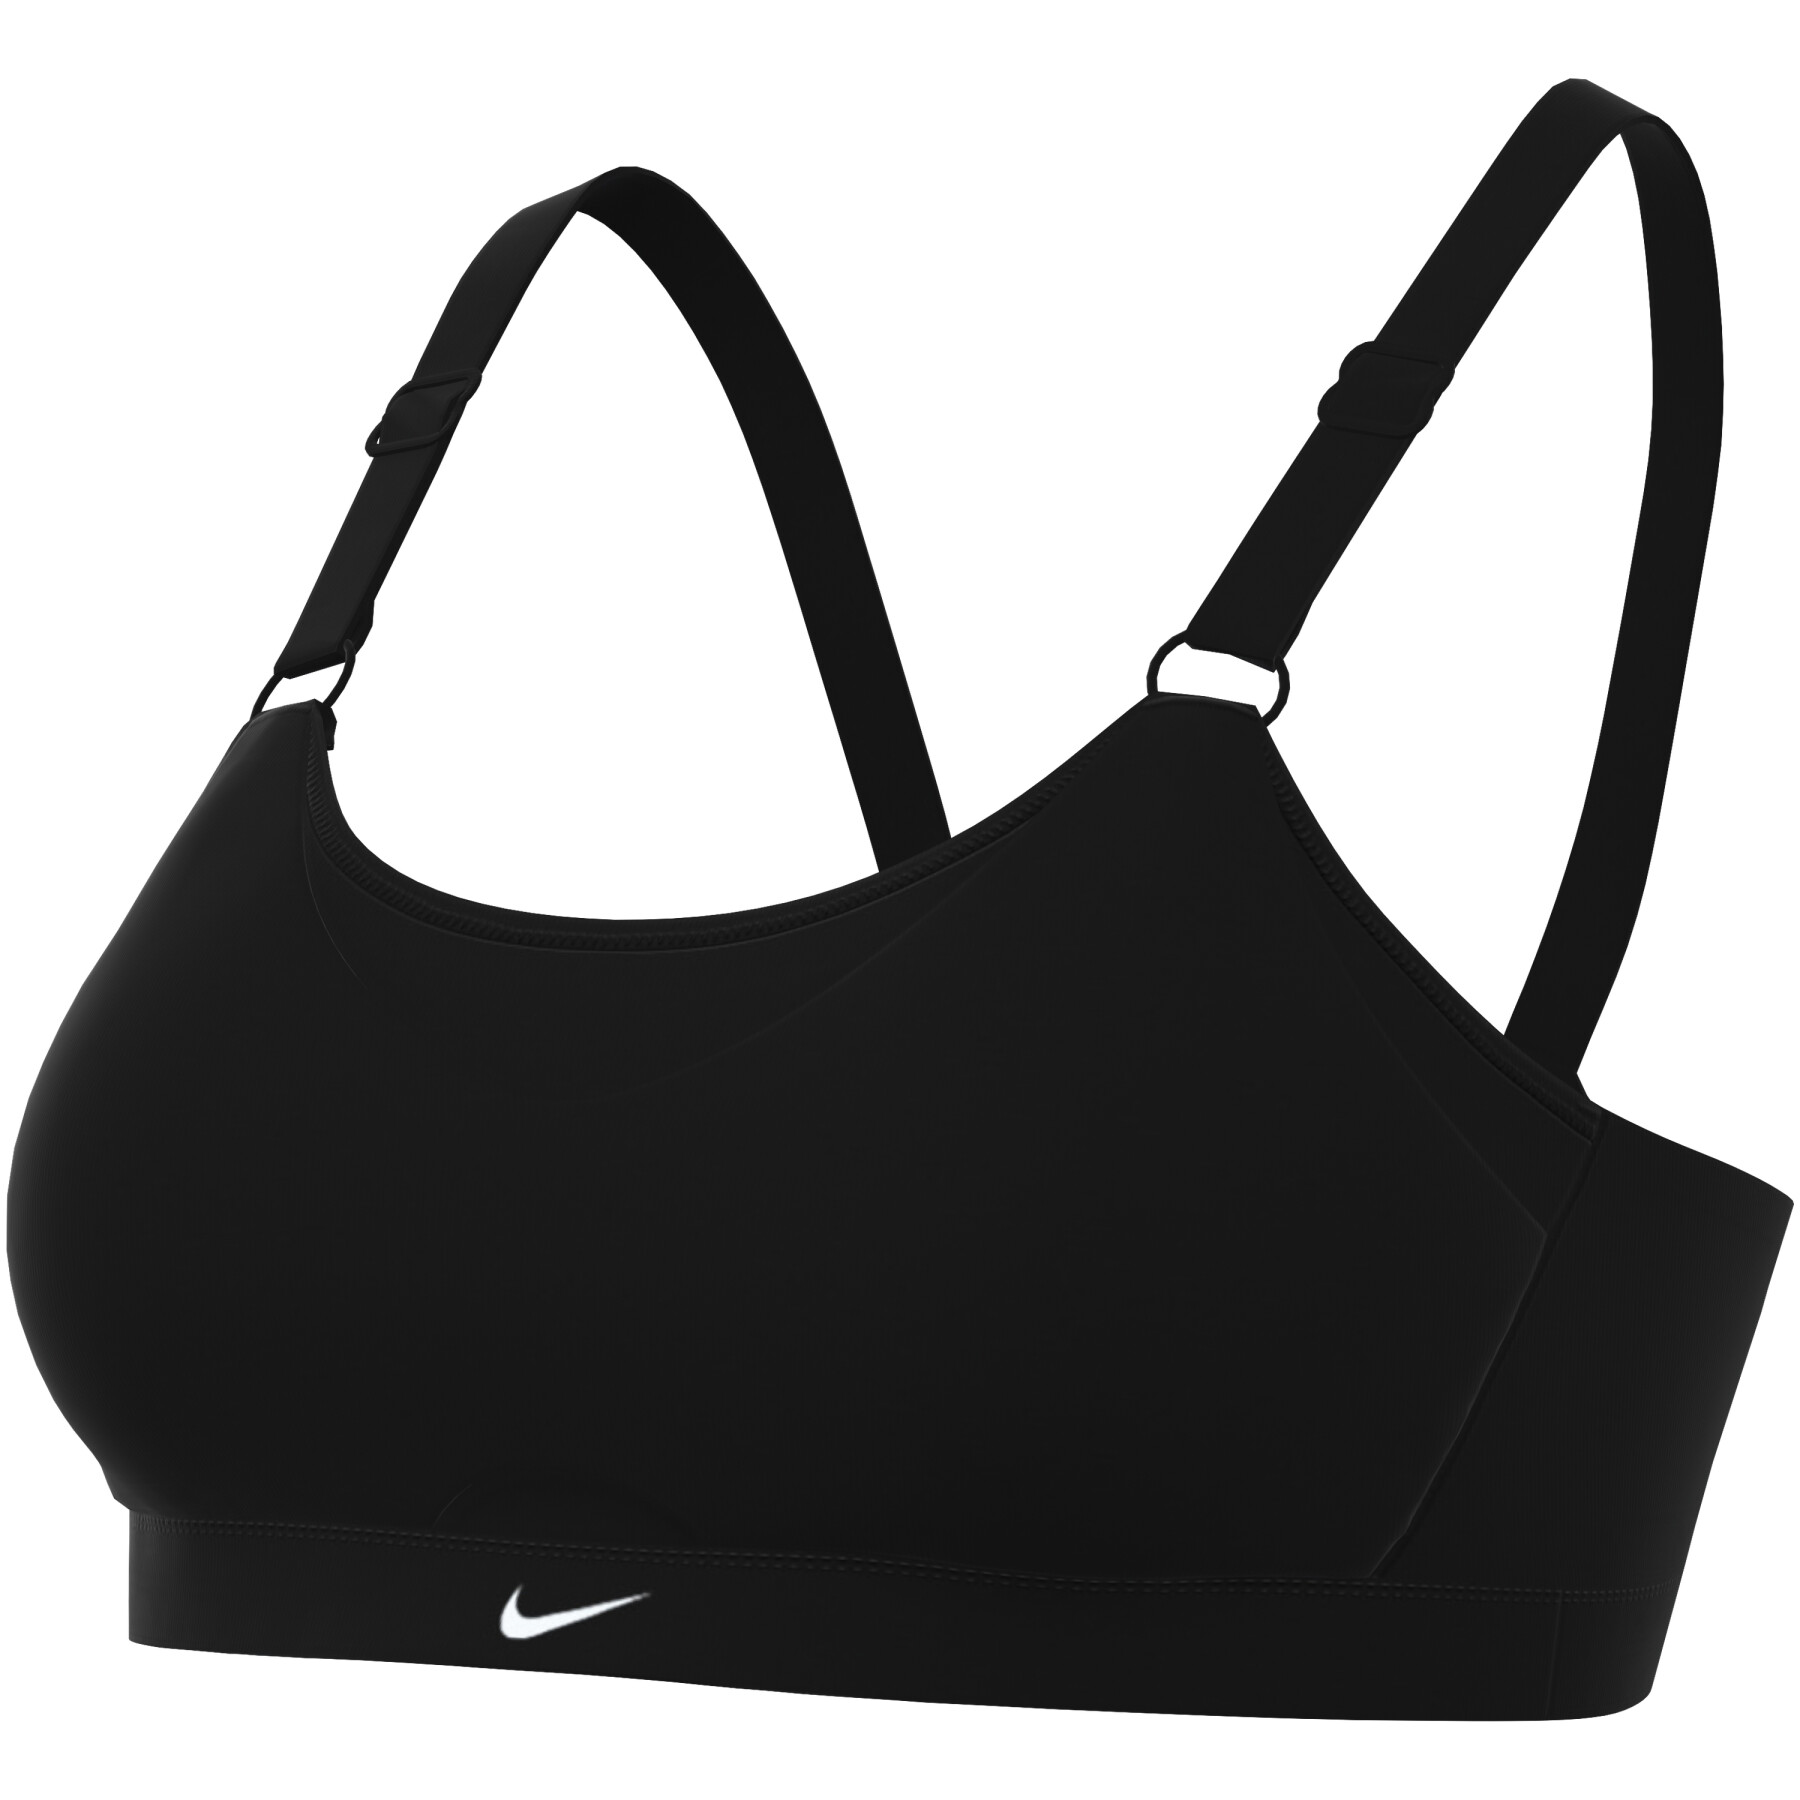 Normal support maternity bra with light lining for breastfeeding women Nike Alate